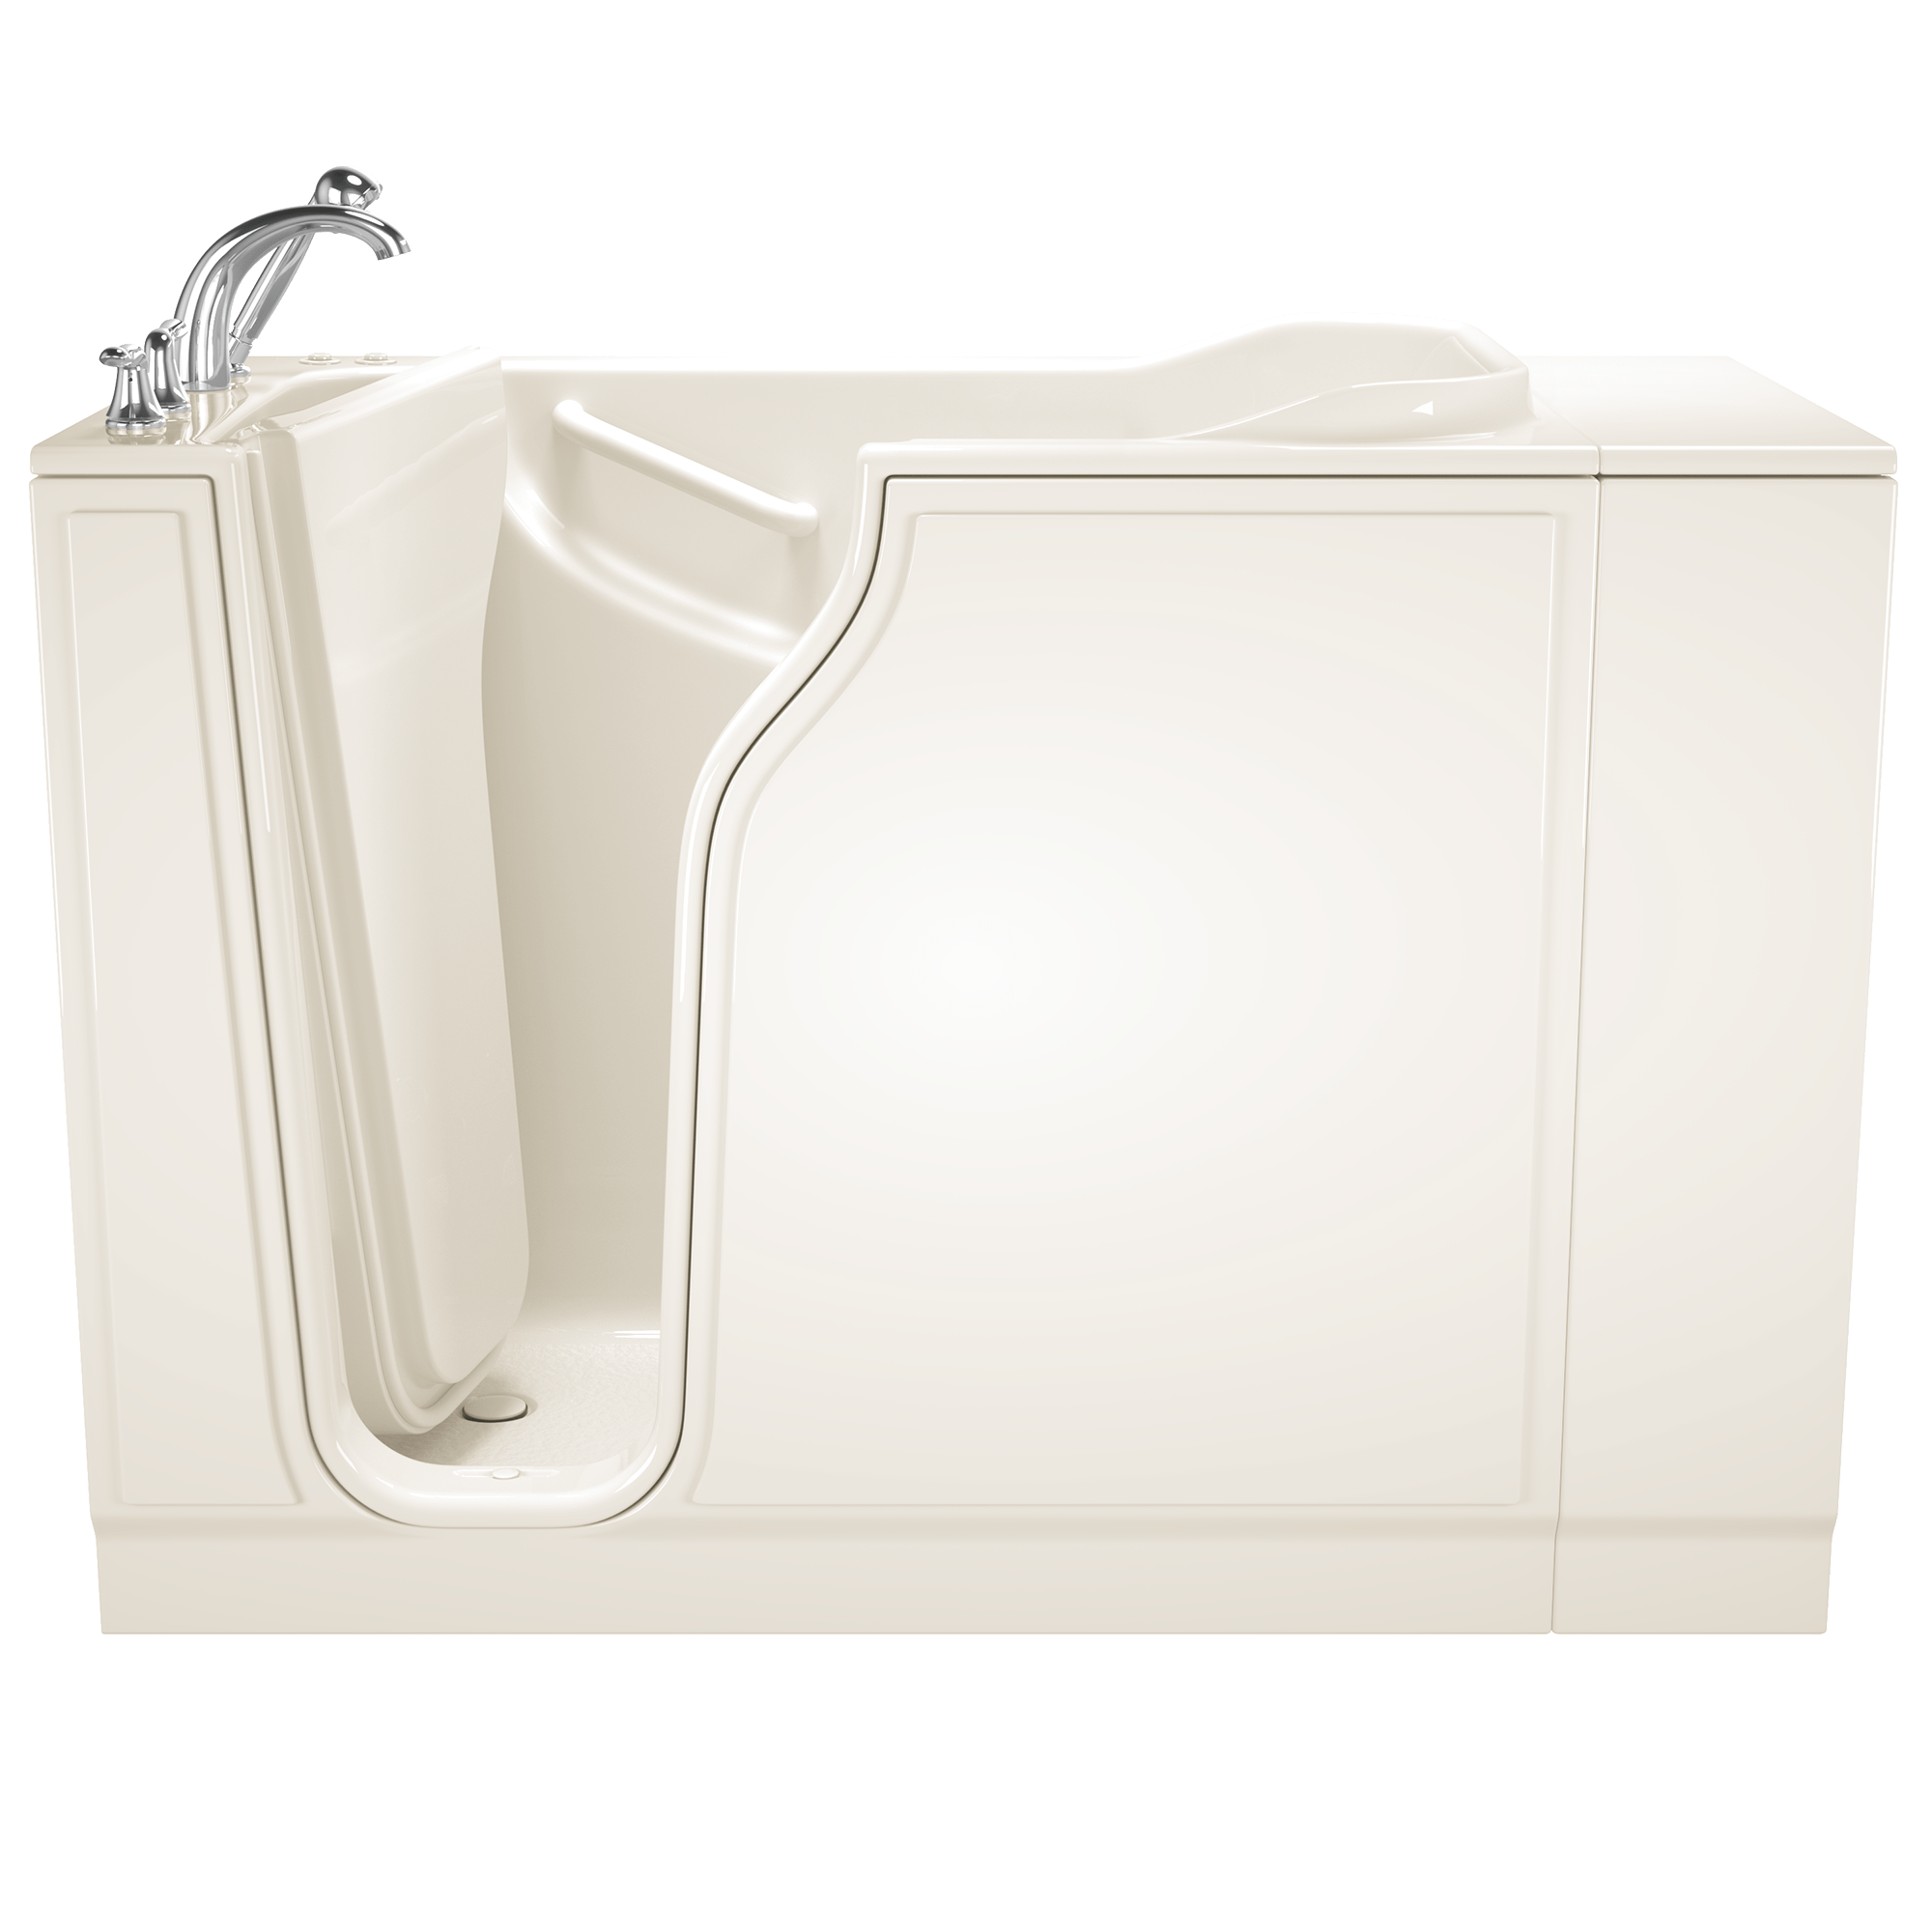 Gelcoat Entry Series 52 x 30-Inch Walk-In Tub With Combination Air Spa and Whirlpool Systems – Left-Hand Drain With Faucet